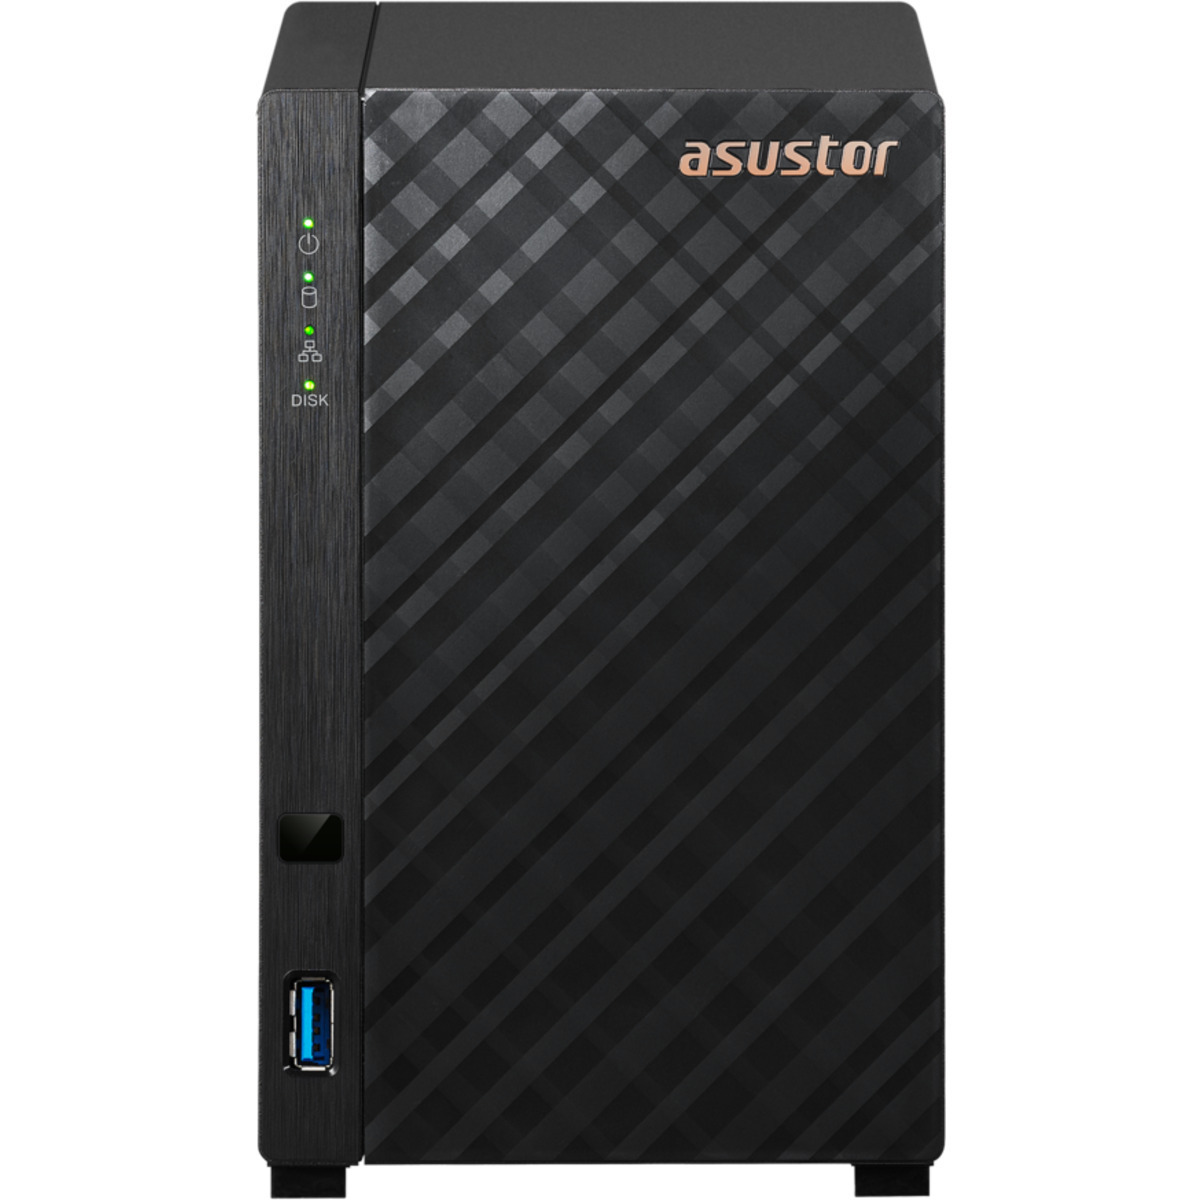 ASUSTOR DRIVESTOR 2 Lite AS1102TL 1tb 2-Bay Desktop Personal / Basic Home / Small Office NAS - Network Attached Storage Device 1x1tb Crucial MX500 CT1000MX500SSD1 2.5 560/510MB/s SATA 6Gb/s SSD CONSUMER Class Drives Installed - Burn-In Tested DRIVESTOR 2 Lite AS1102TL